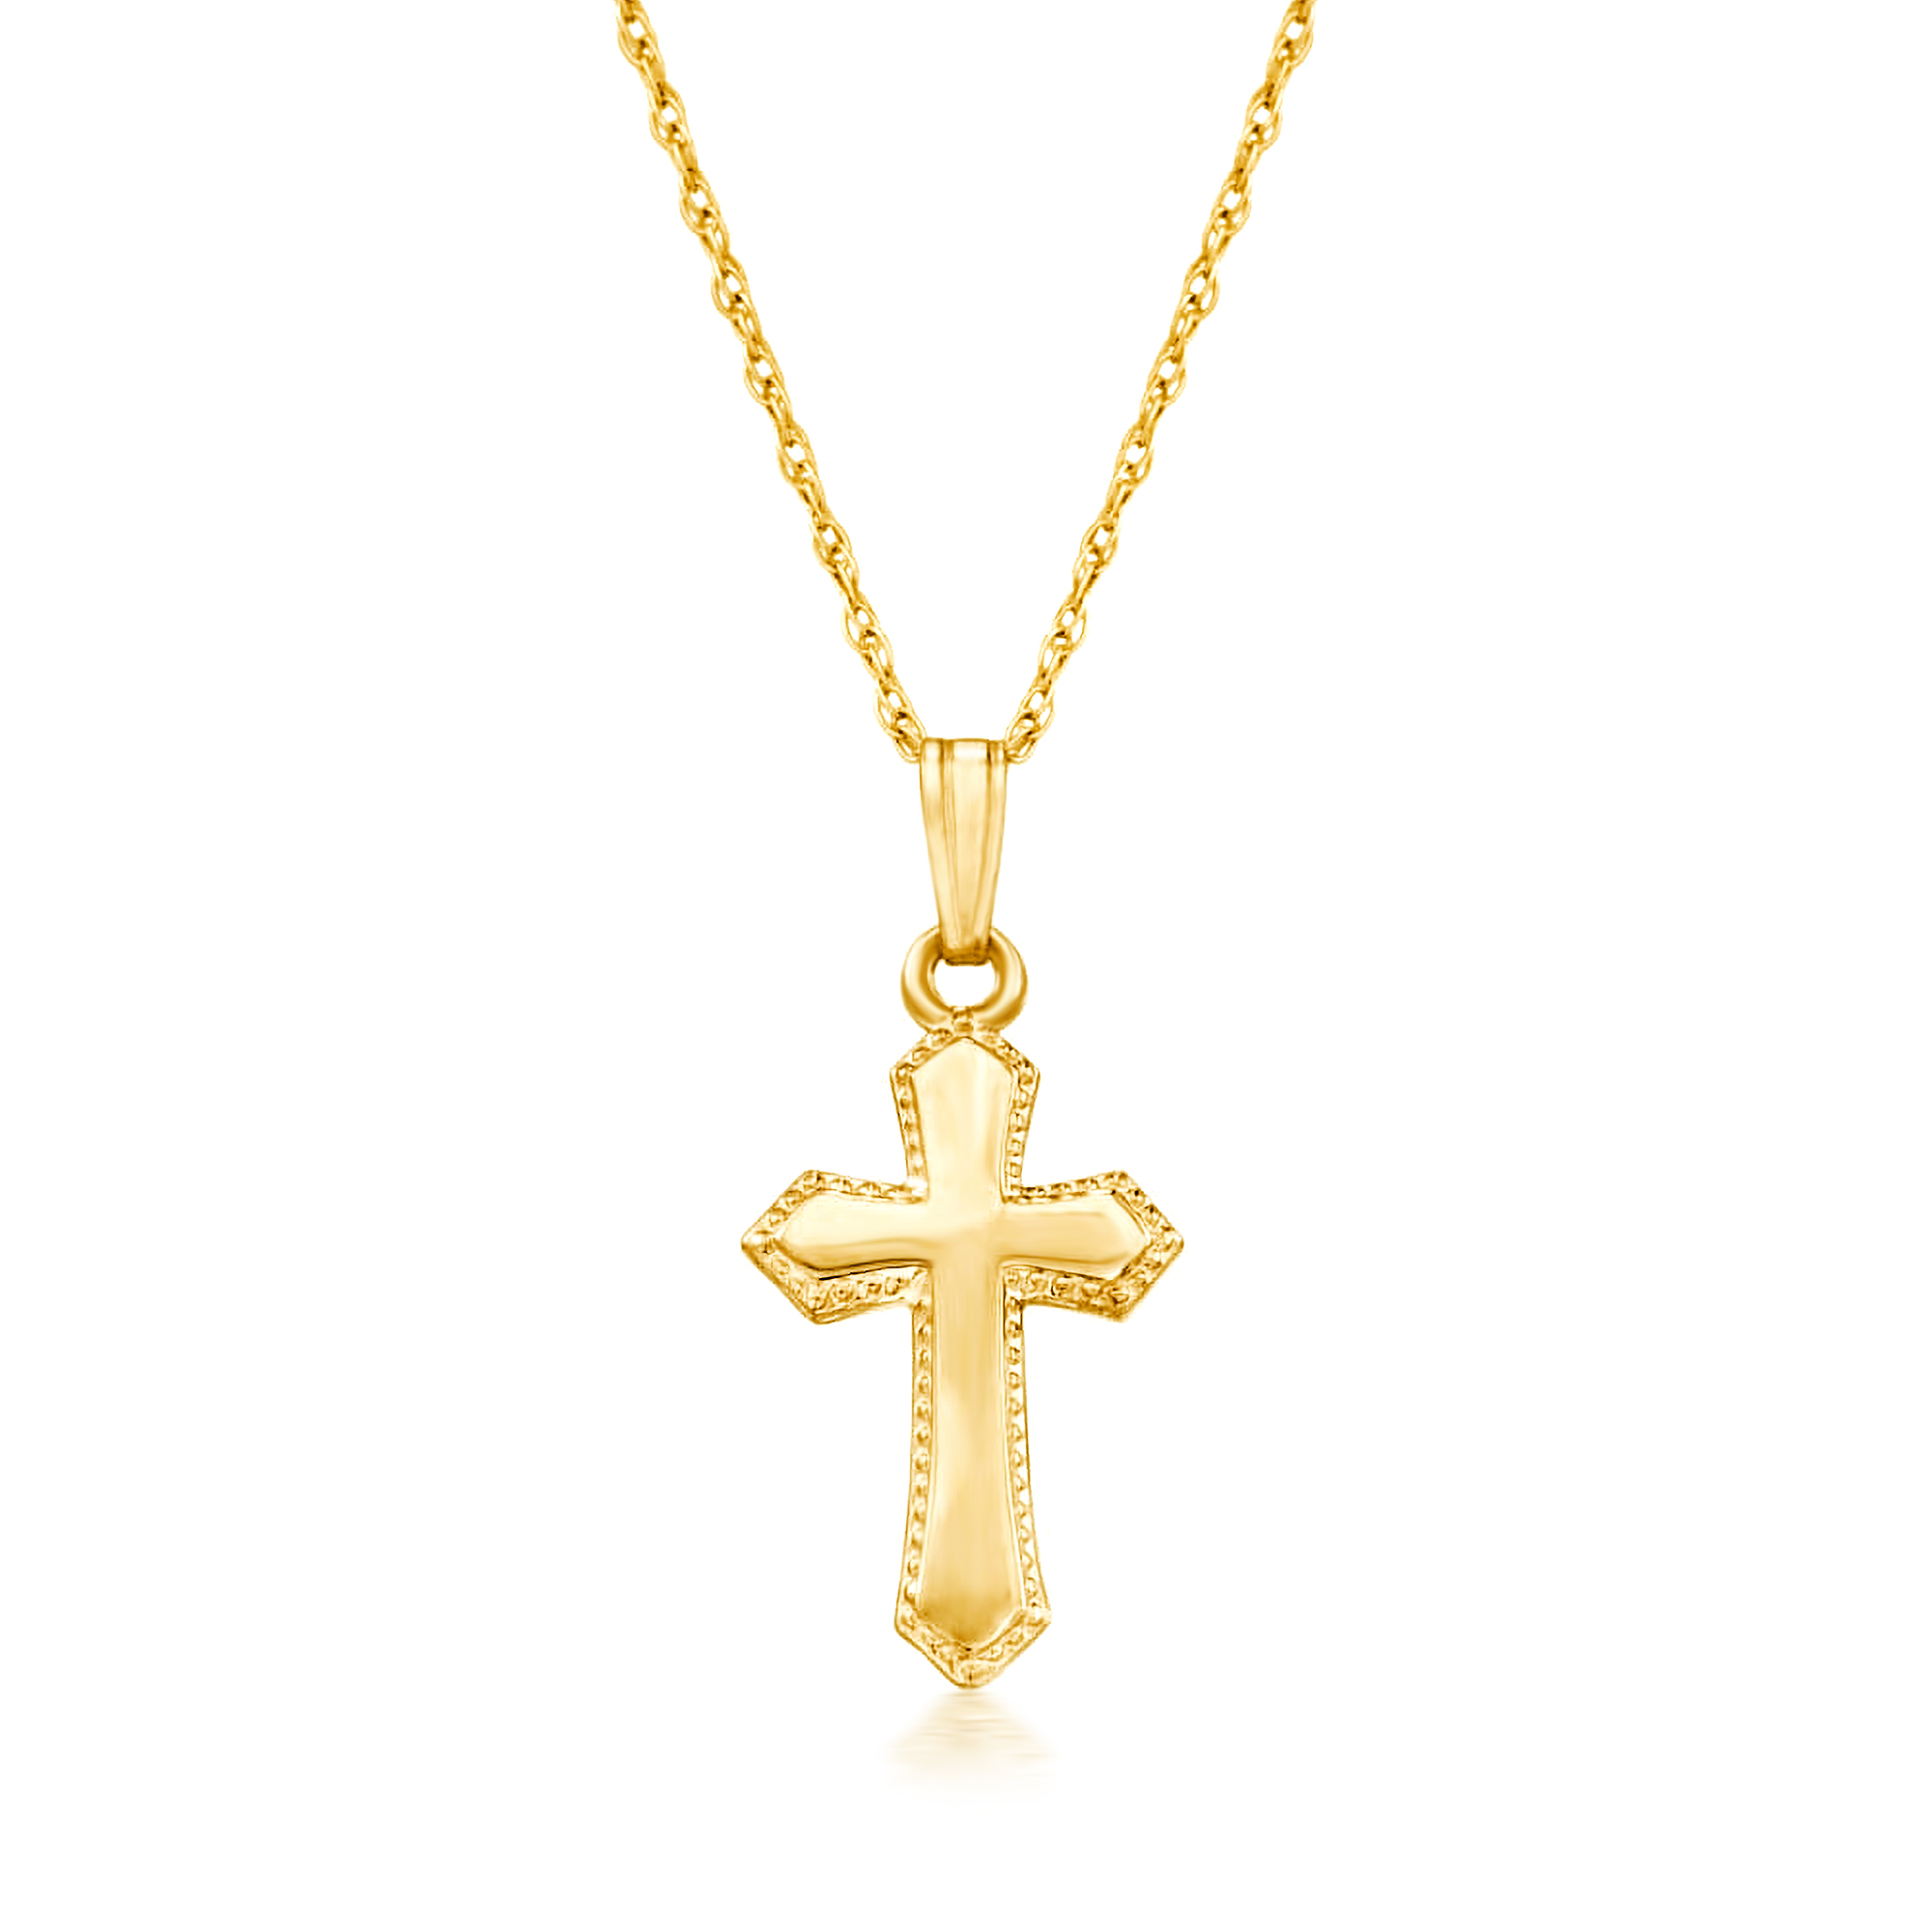 Child's 14kt Yellow Gold Beaded Cross Pendant Necklace. 15